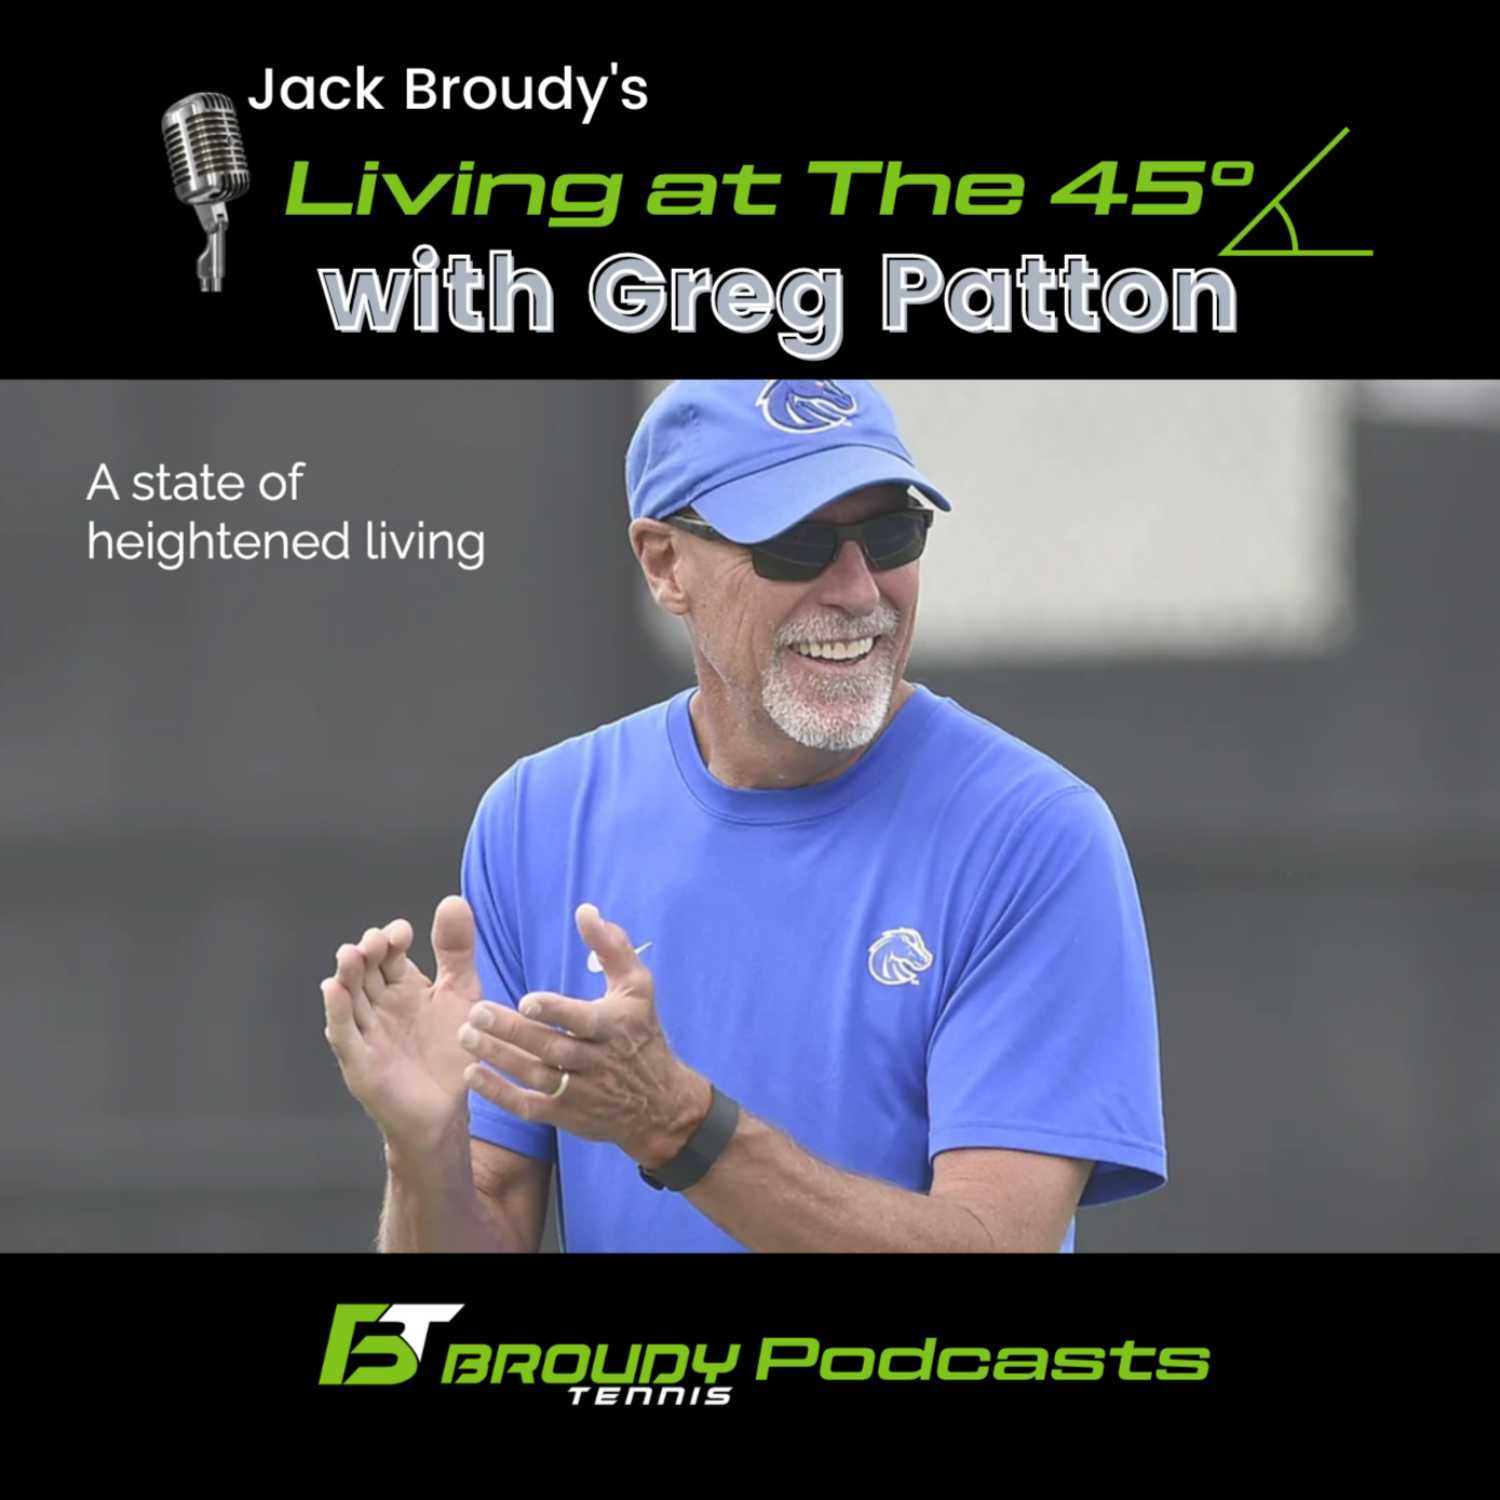 Living at The 45 with Greg Patton: Heart of a Legendary Tennis Coach